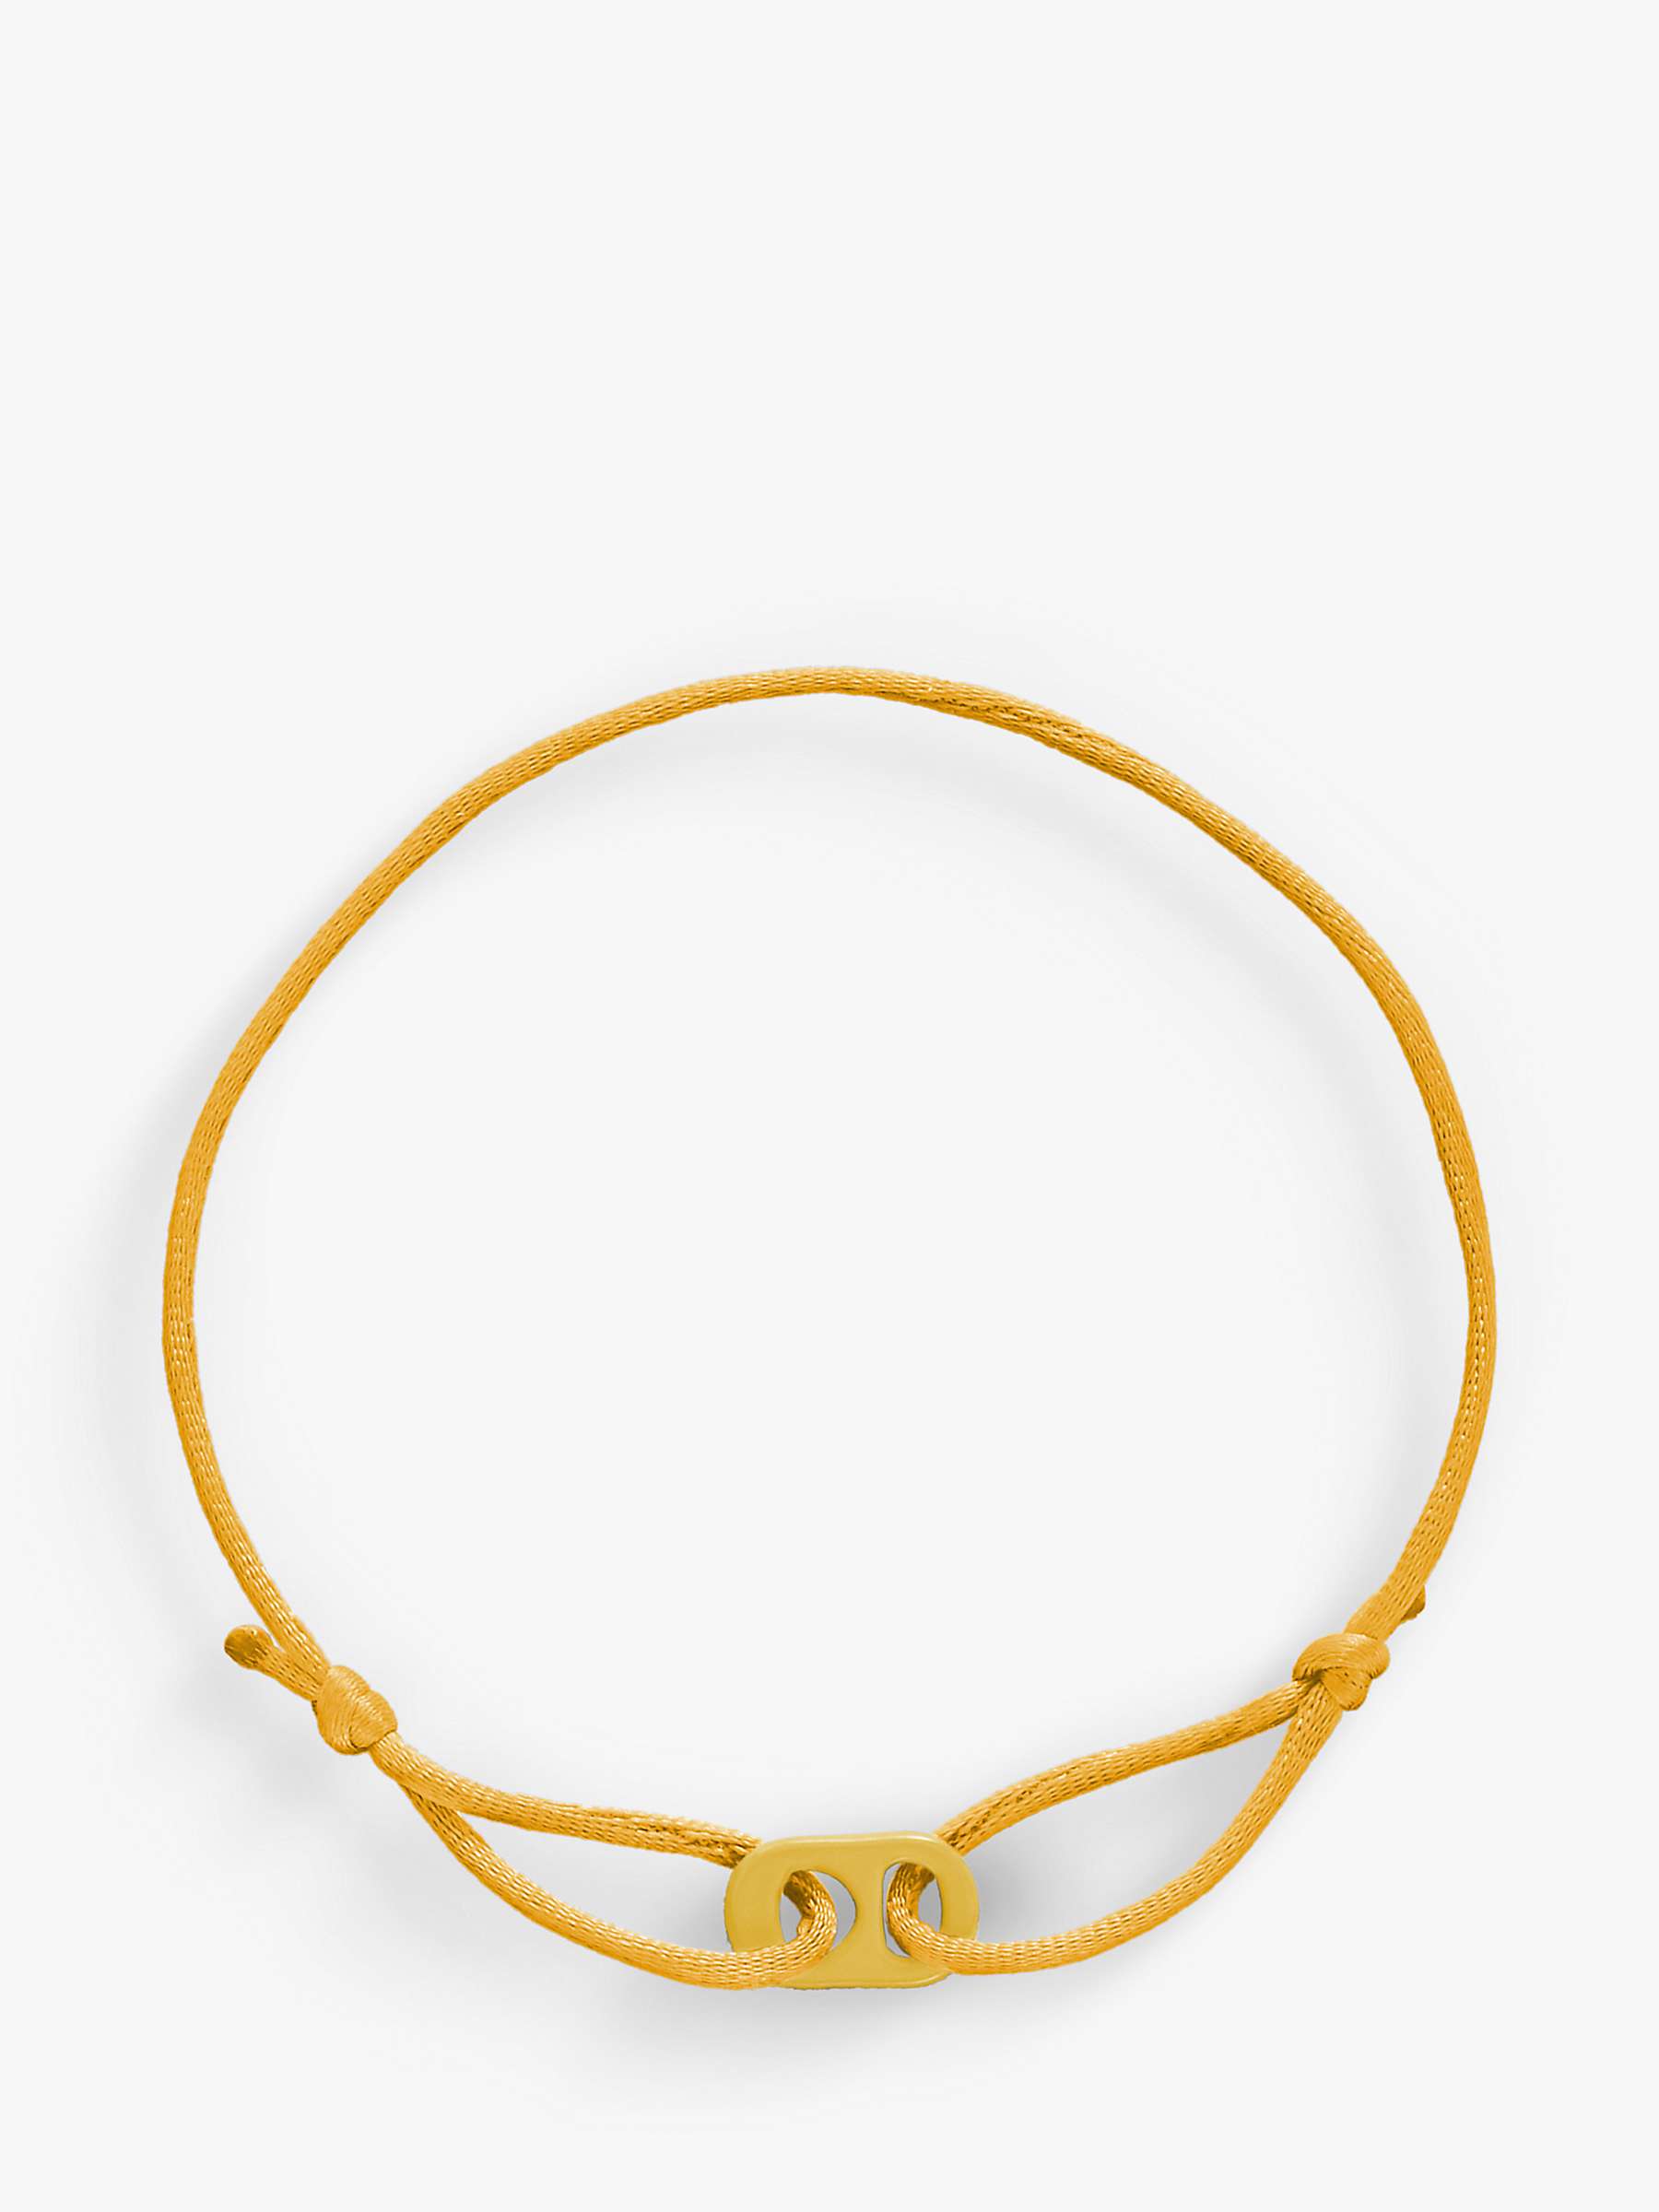 Buy #TOGETHERBAND UN Goal 7 - Affordable and Clean Energy Recycled Plastic Mini Bracelet, Pack of 2, Yellow Online at johnlewis.com